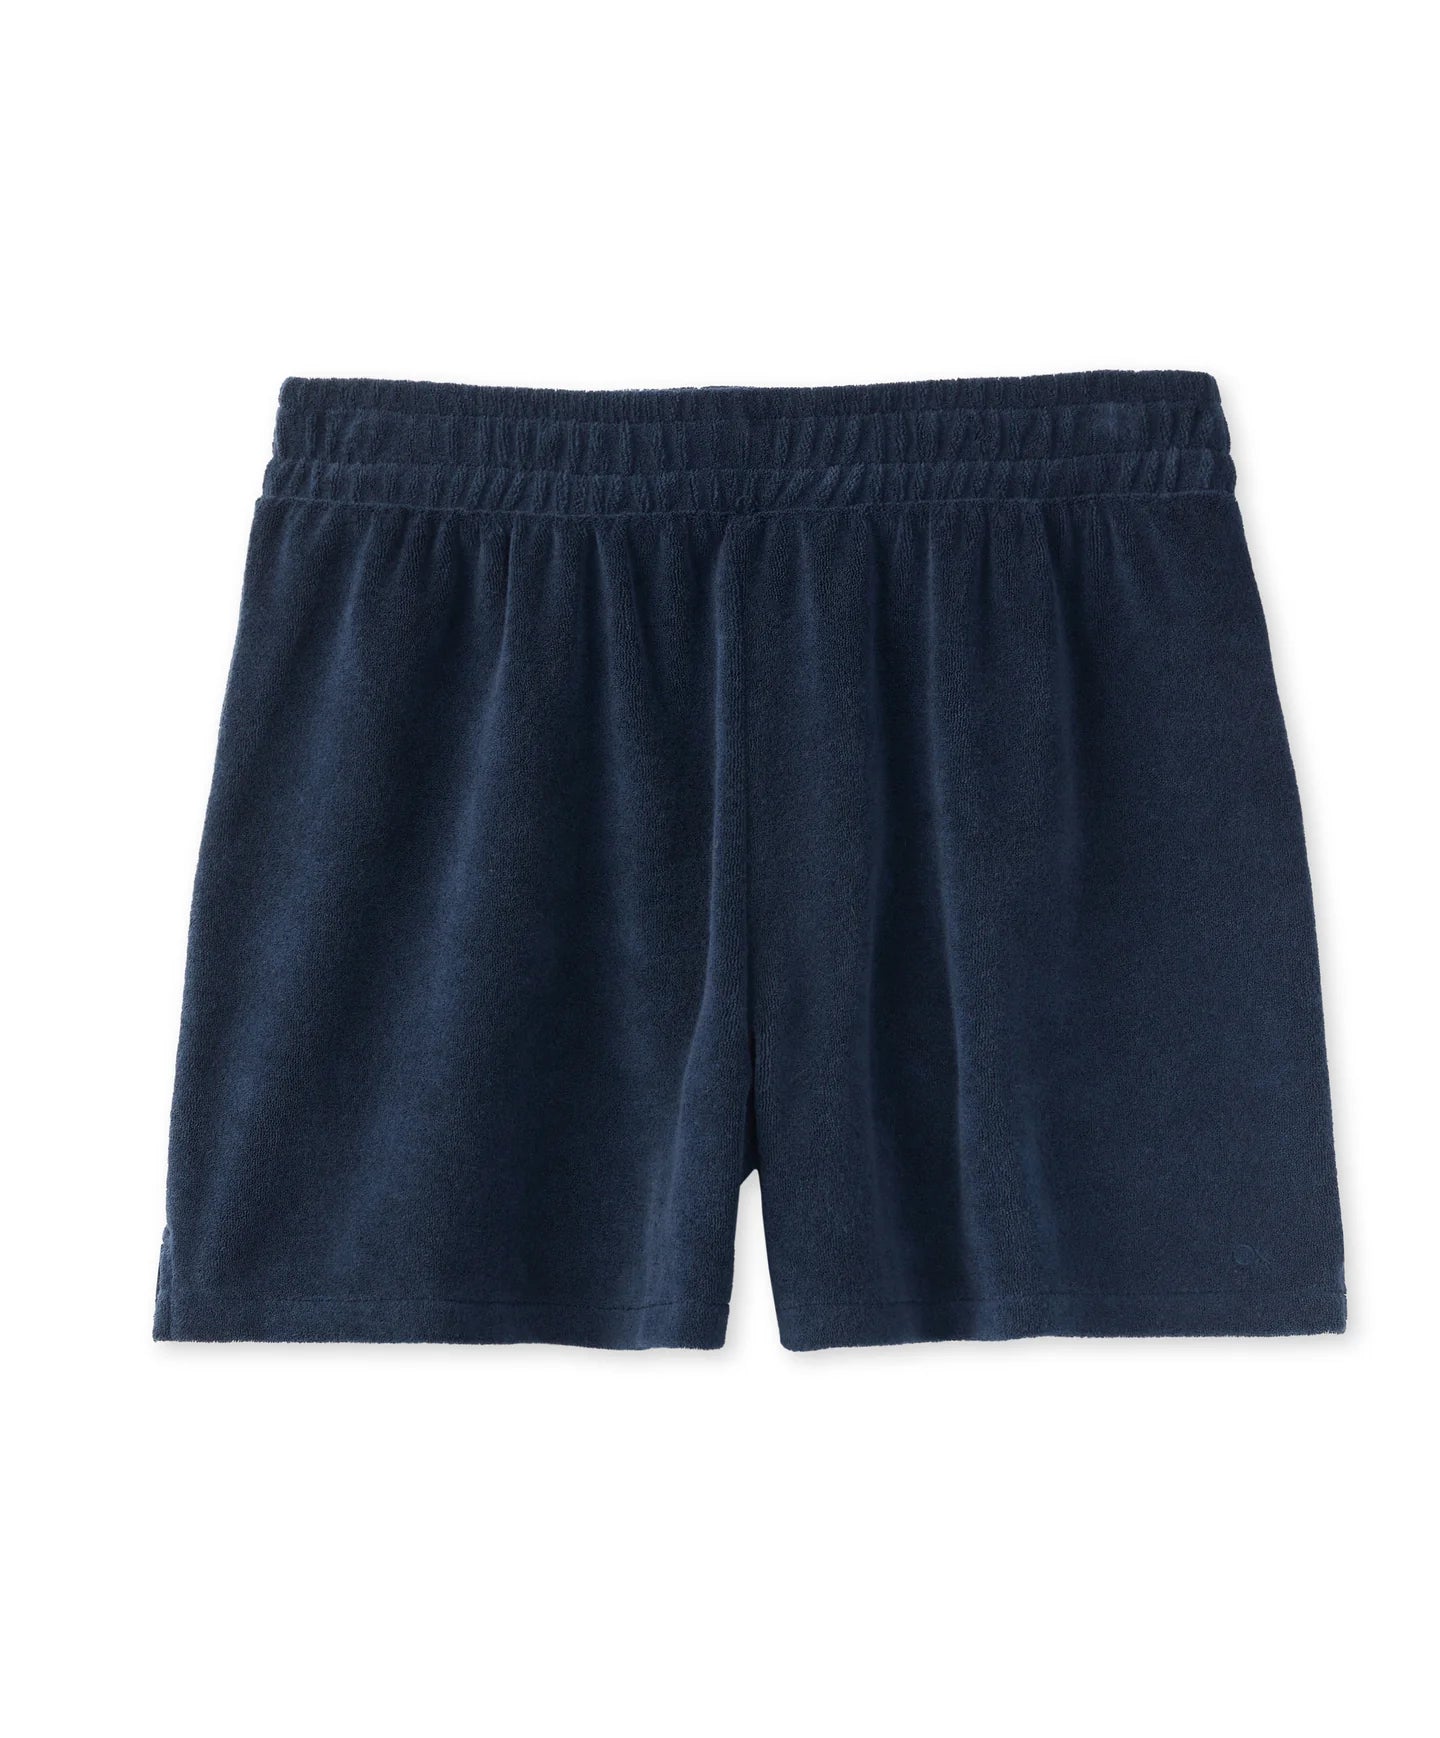 OuterKnown Rewind Shorts W Shorts OUTERKNOWN WOMENS 